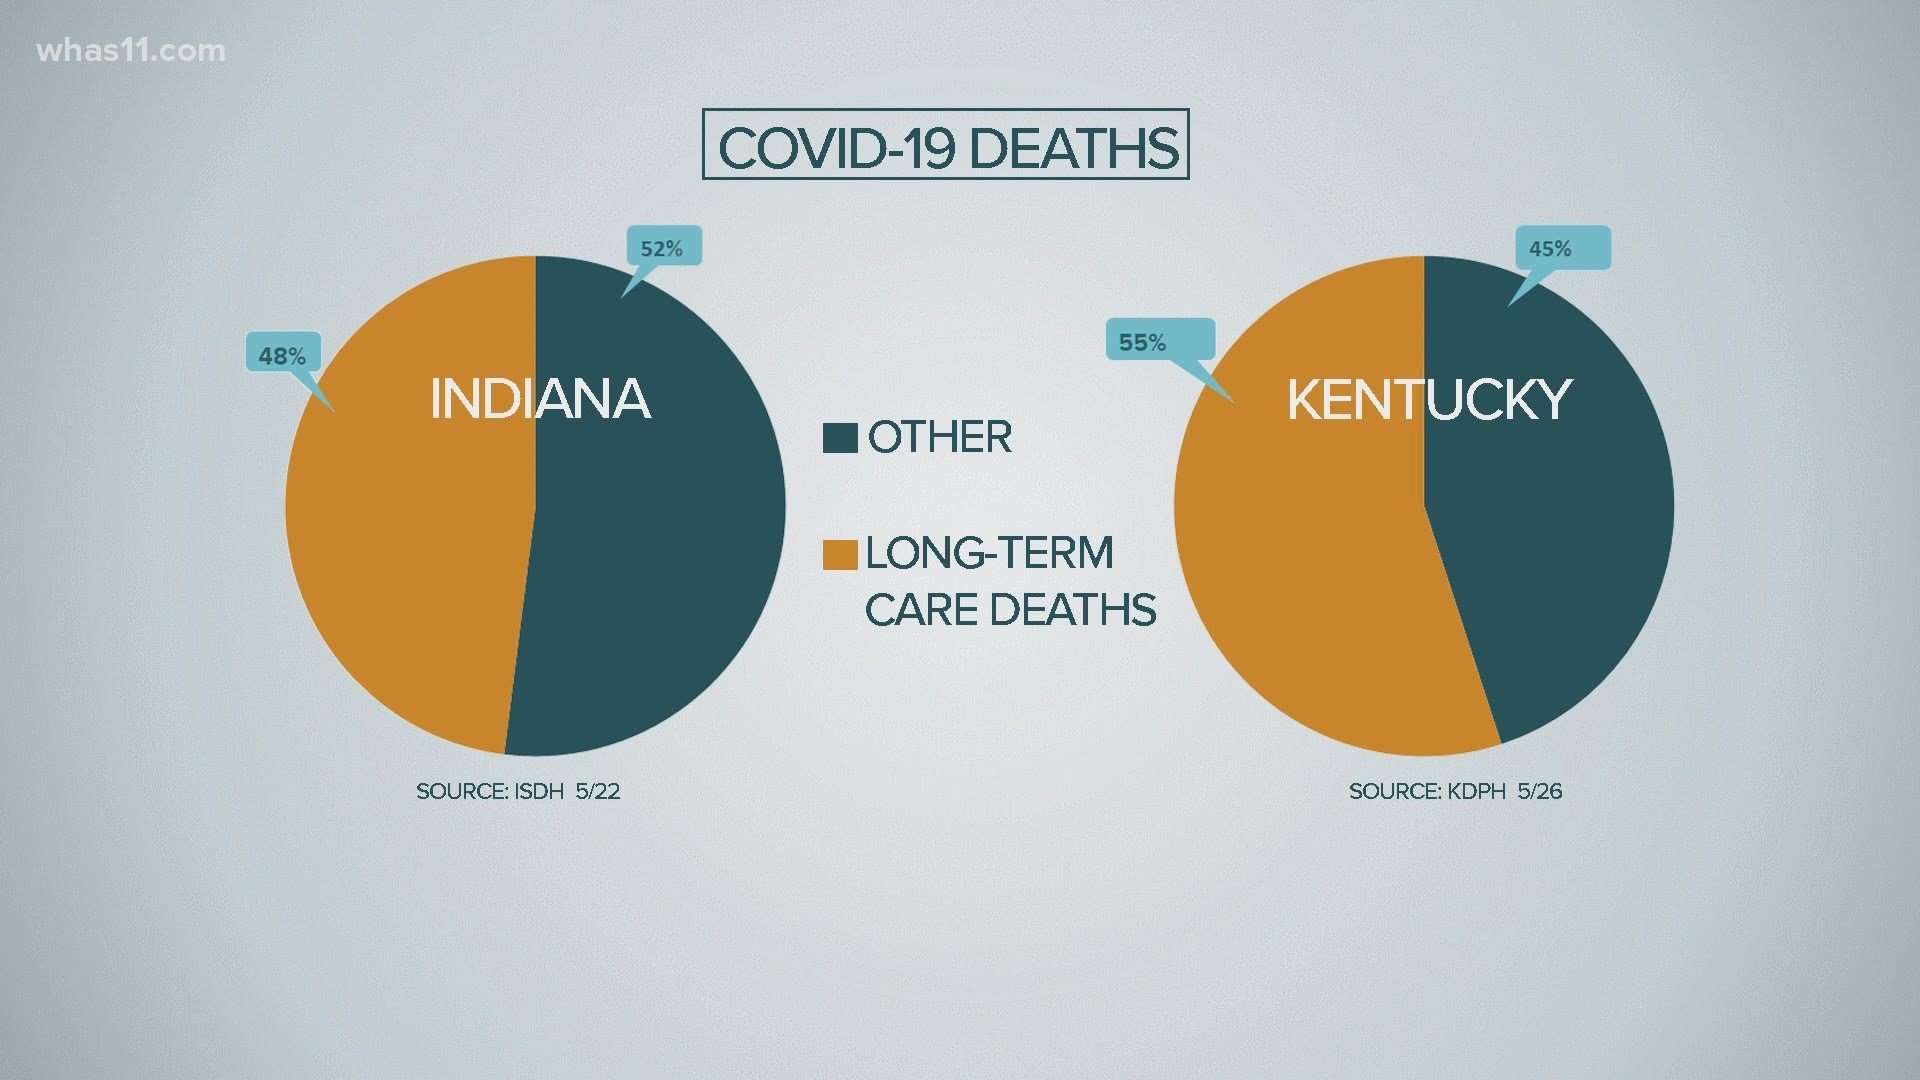 While restrictions ease in Kentucky and Indiana, COVID-19 is still a significant threat for those in long-term care.